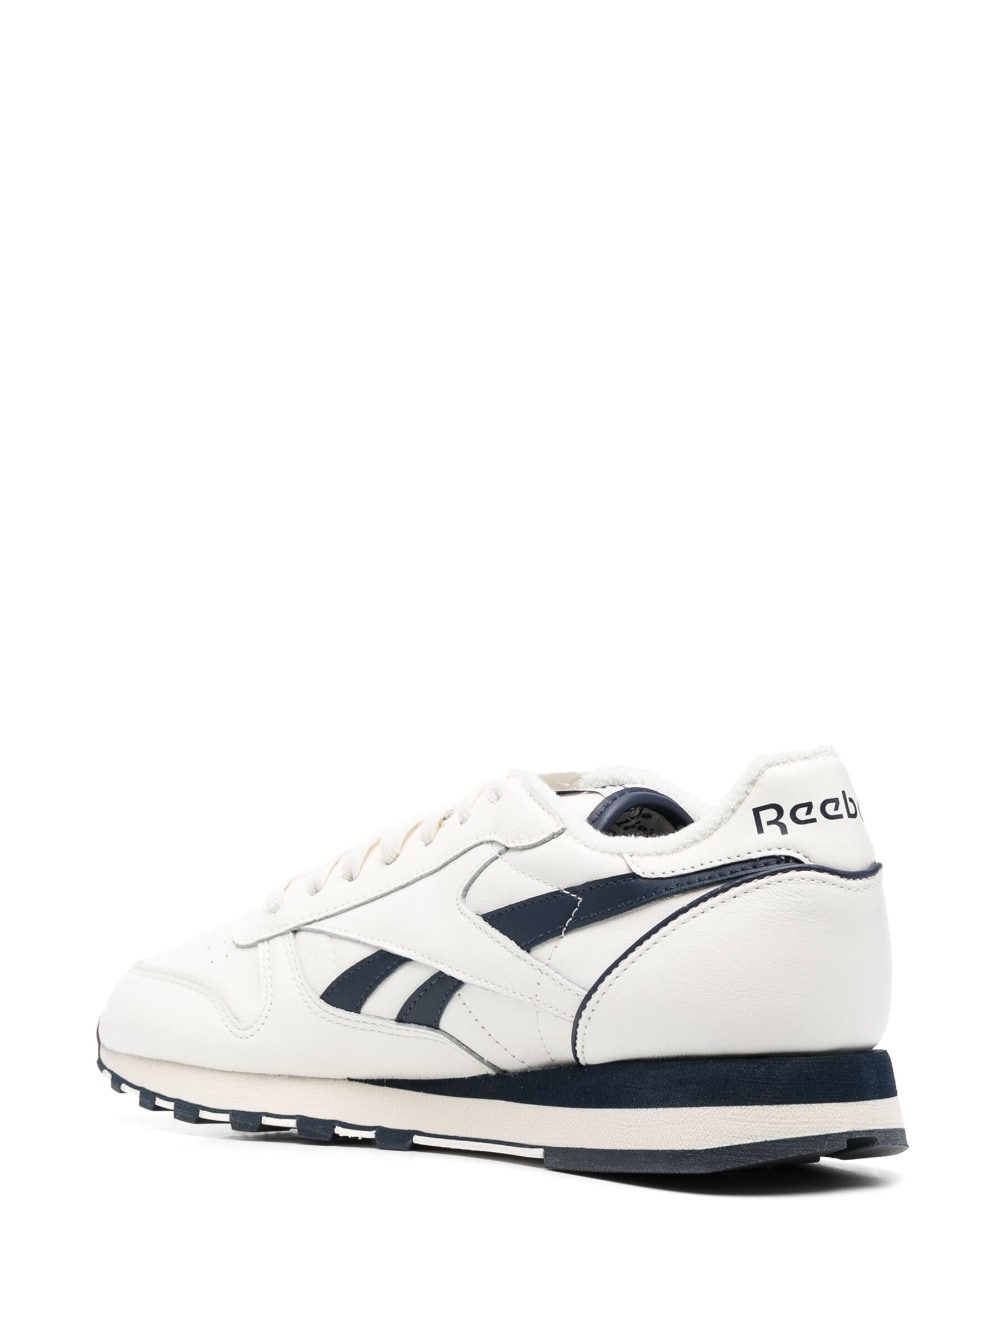 Ngg X Reebok NGG X REEBOK- Classic Leather 1983 Leather Sneakers